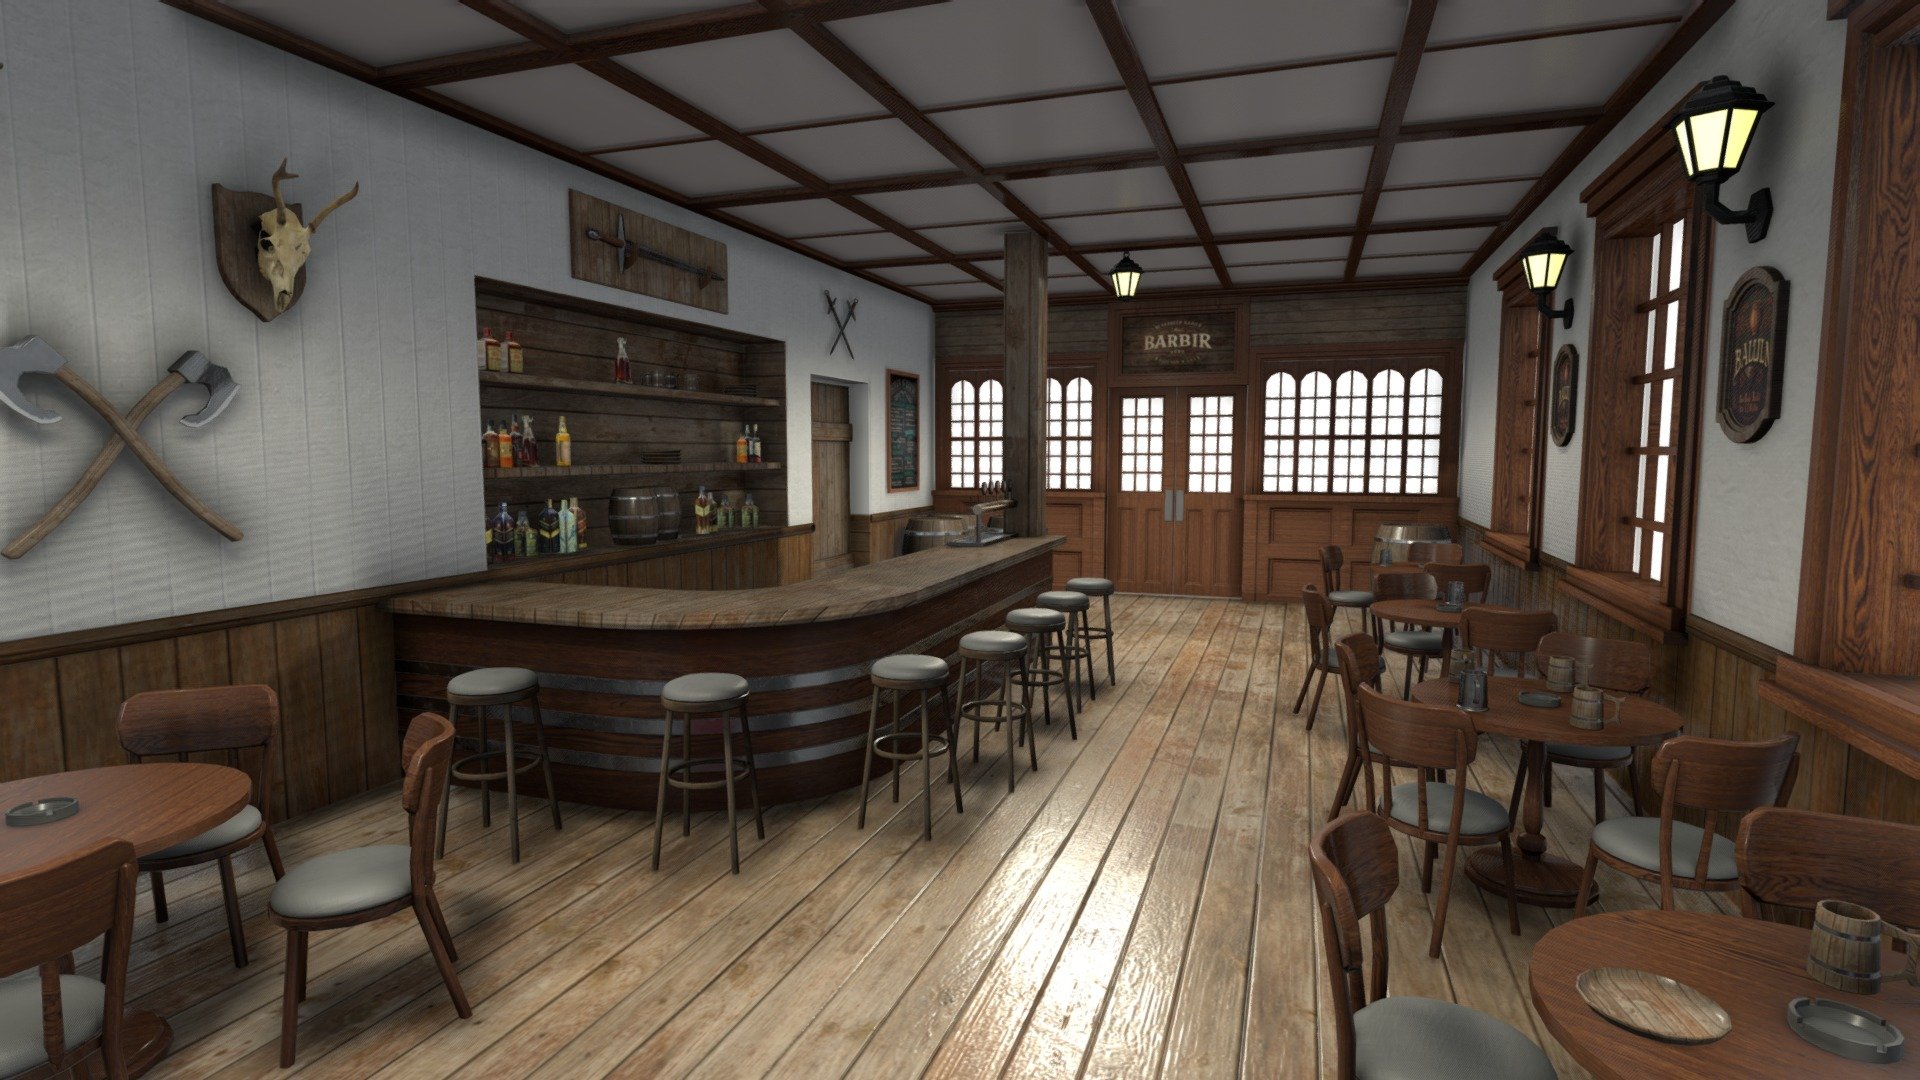 Full interior scene of an old pub, can be used in Unreal Engine or Unity 3d model